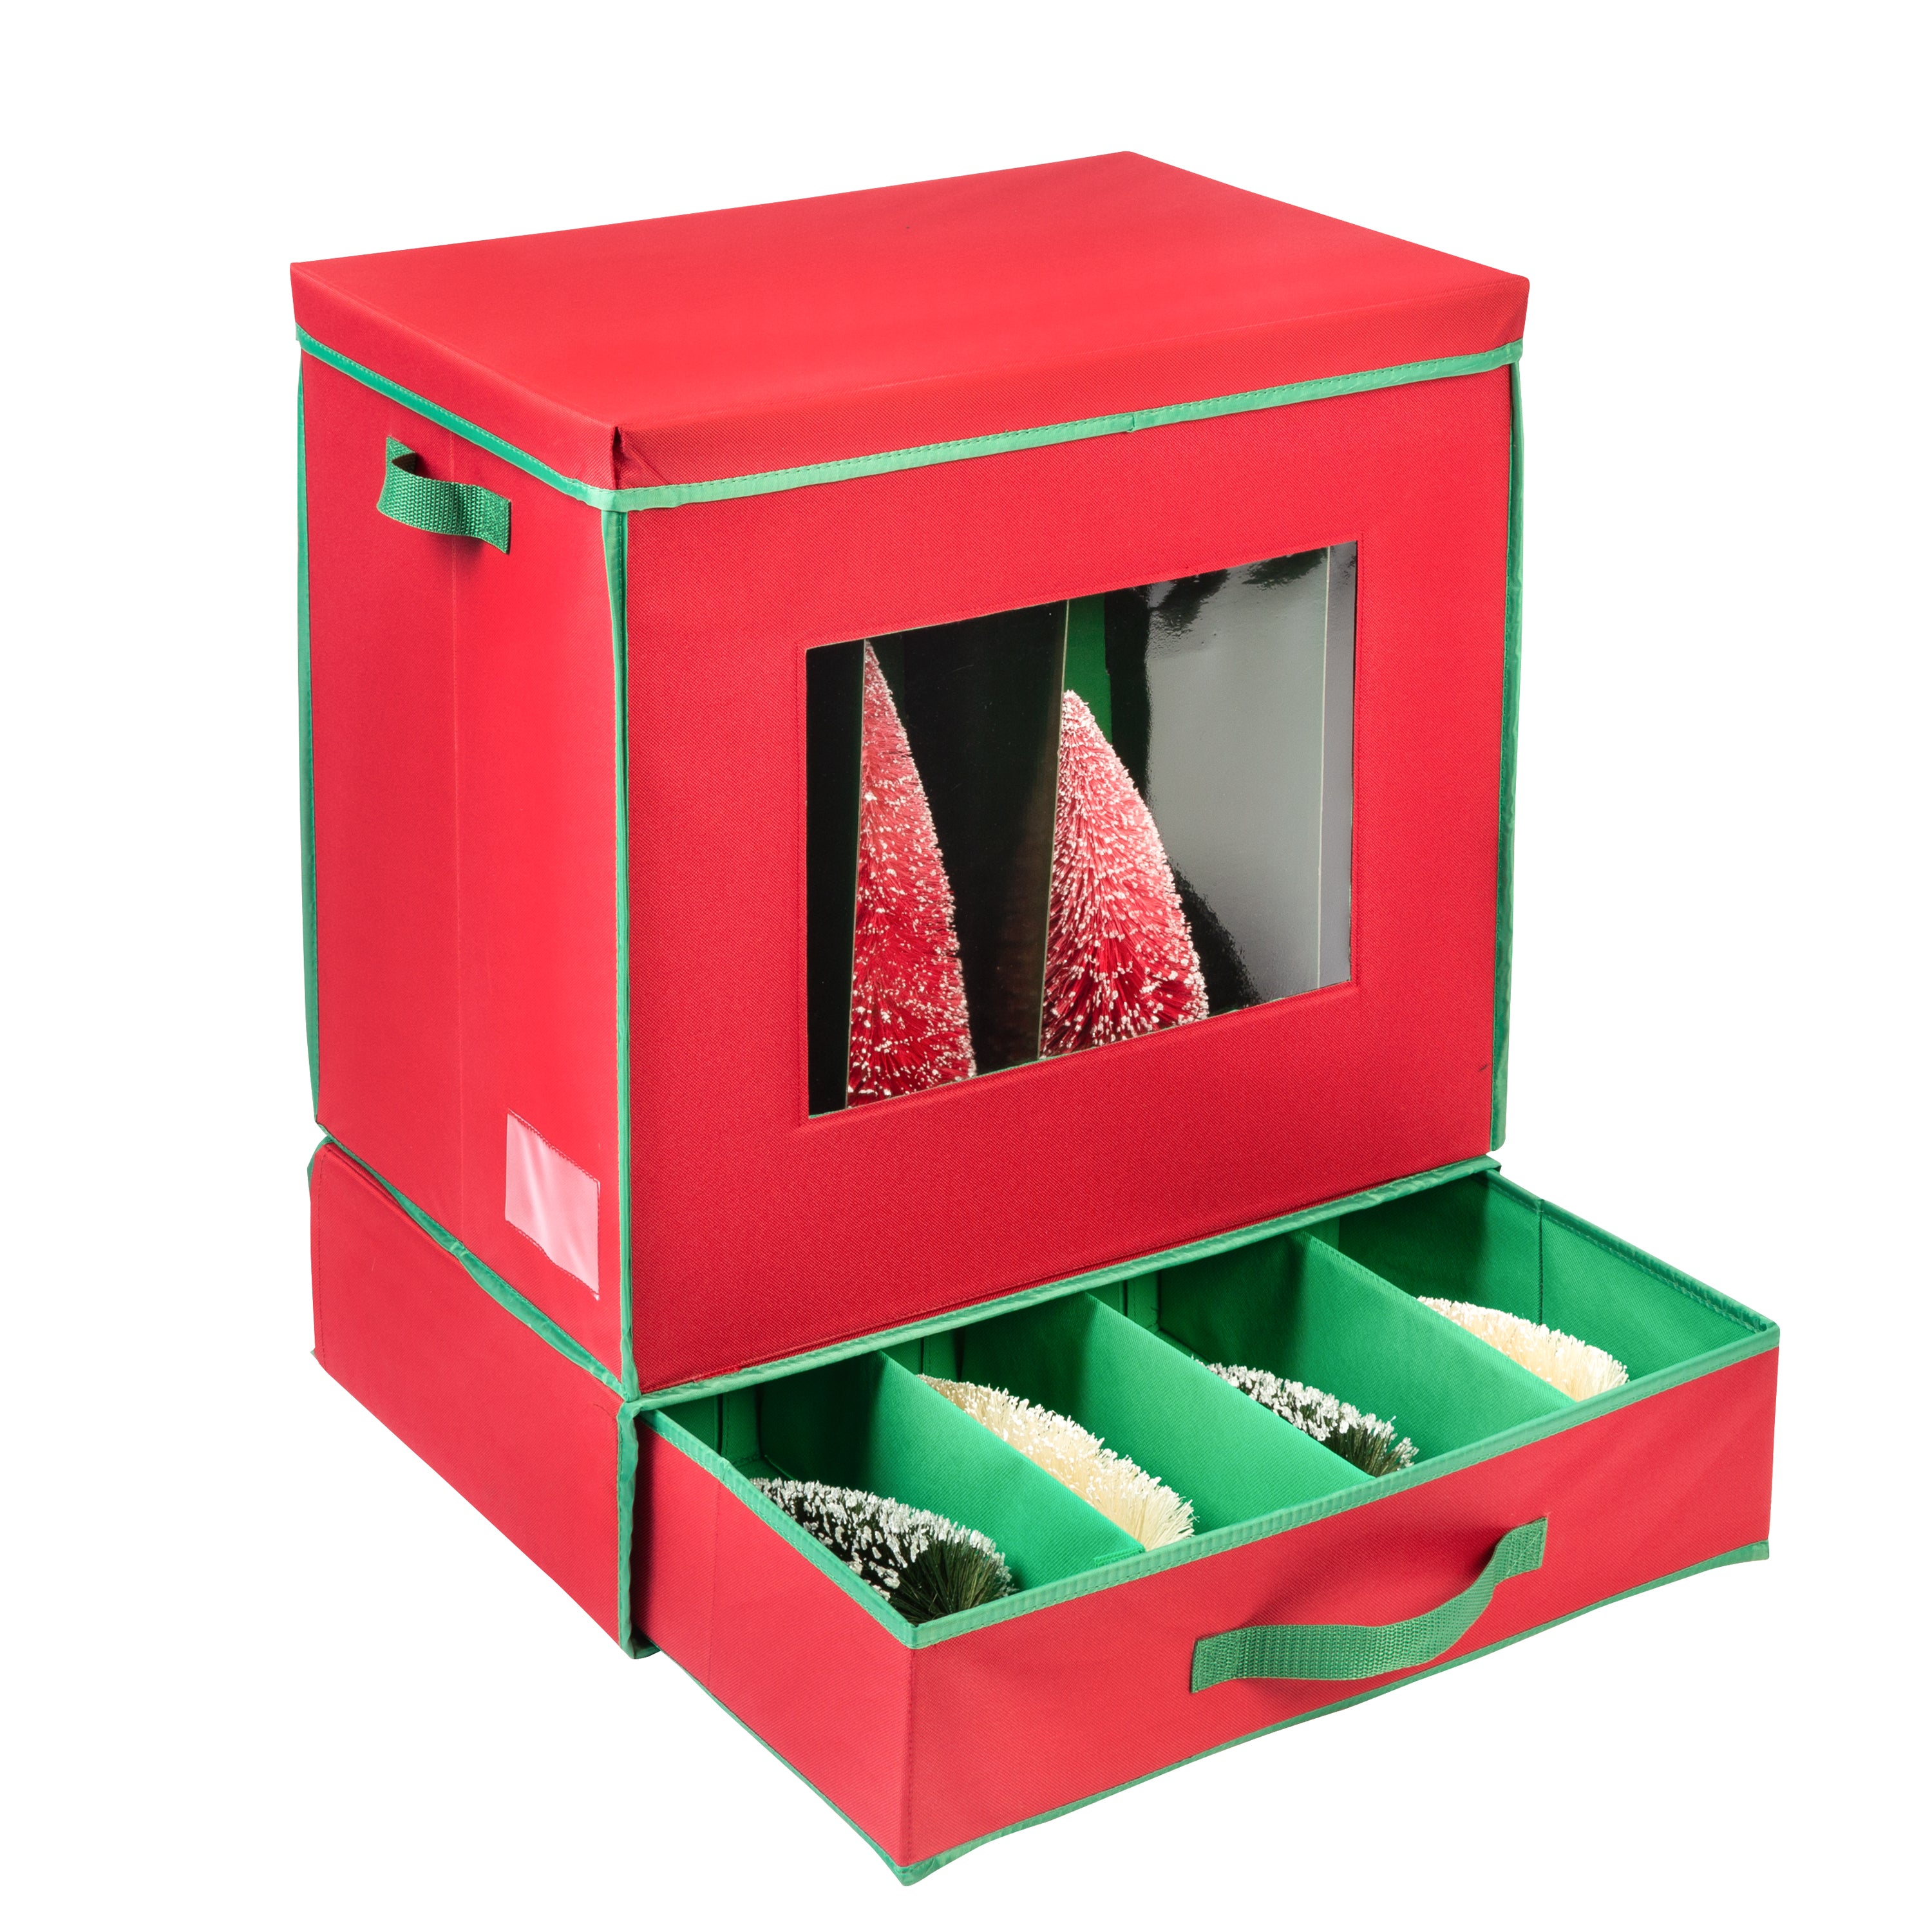 Honey-Can-Do Holiday Decorations Storage Box Red